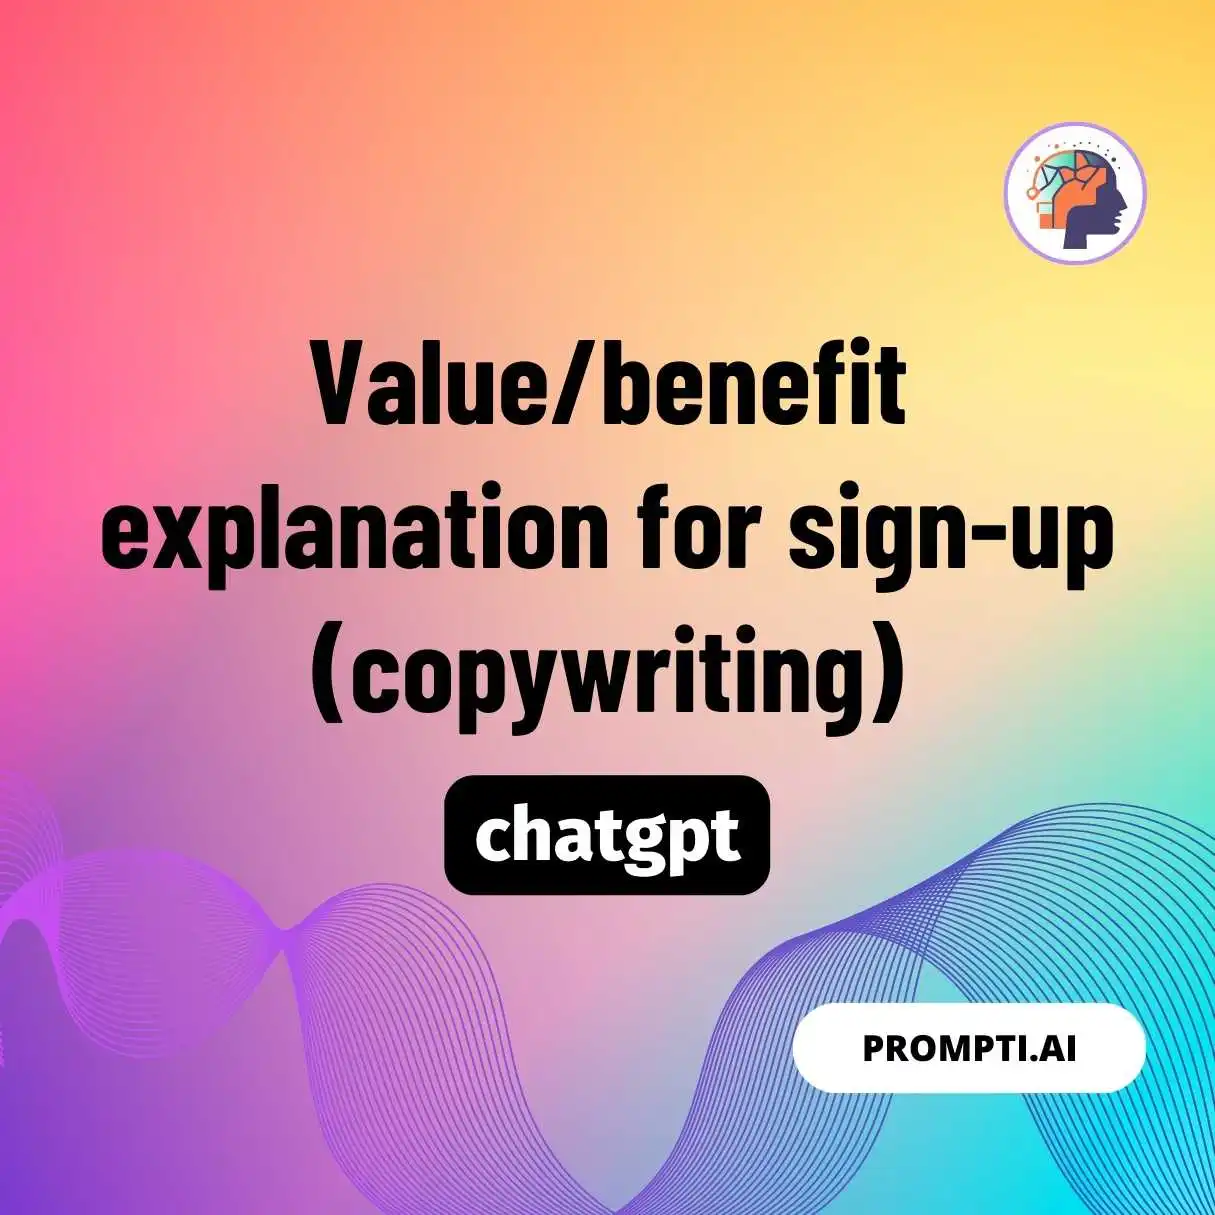 Value/benefit explanation for sign-up (copywriting)